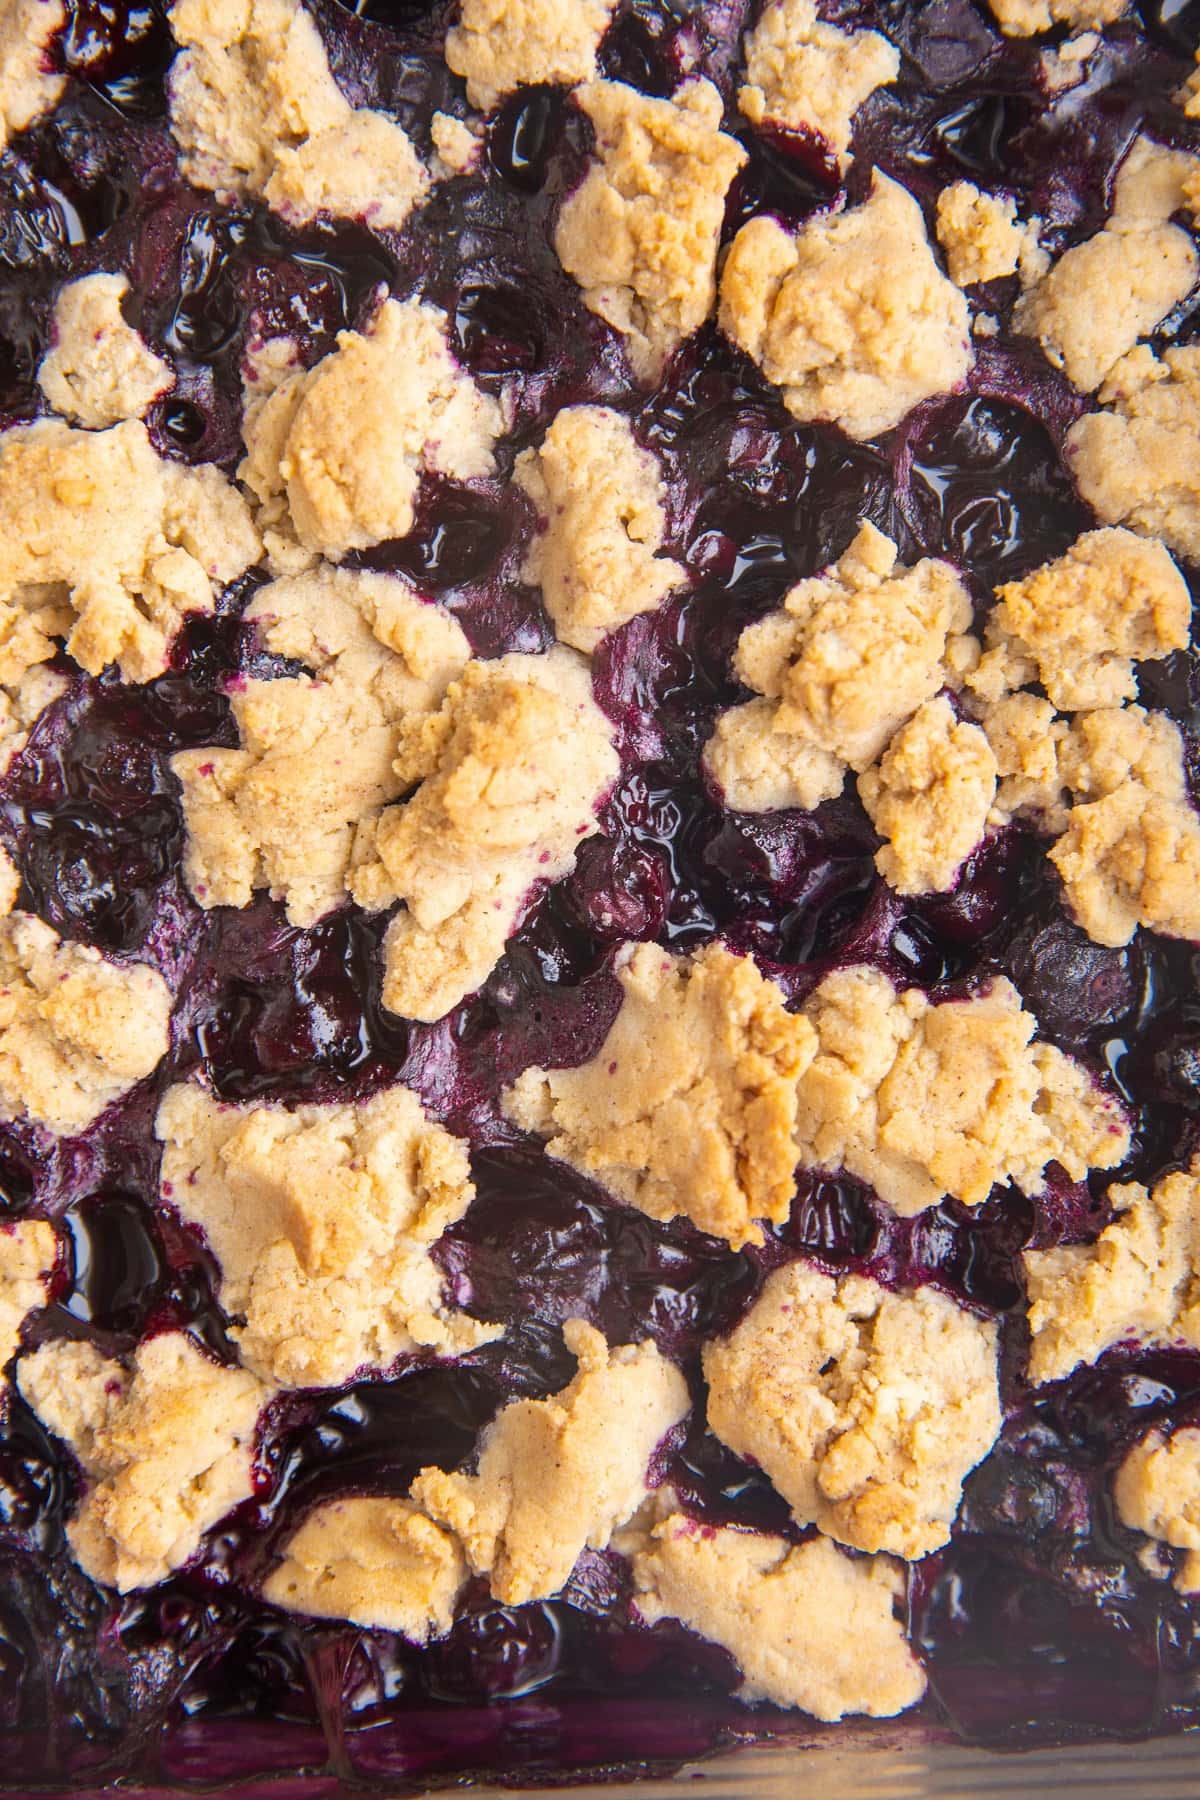 Blueberry crumble fresh out of the oven.